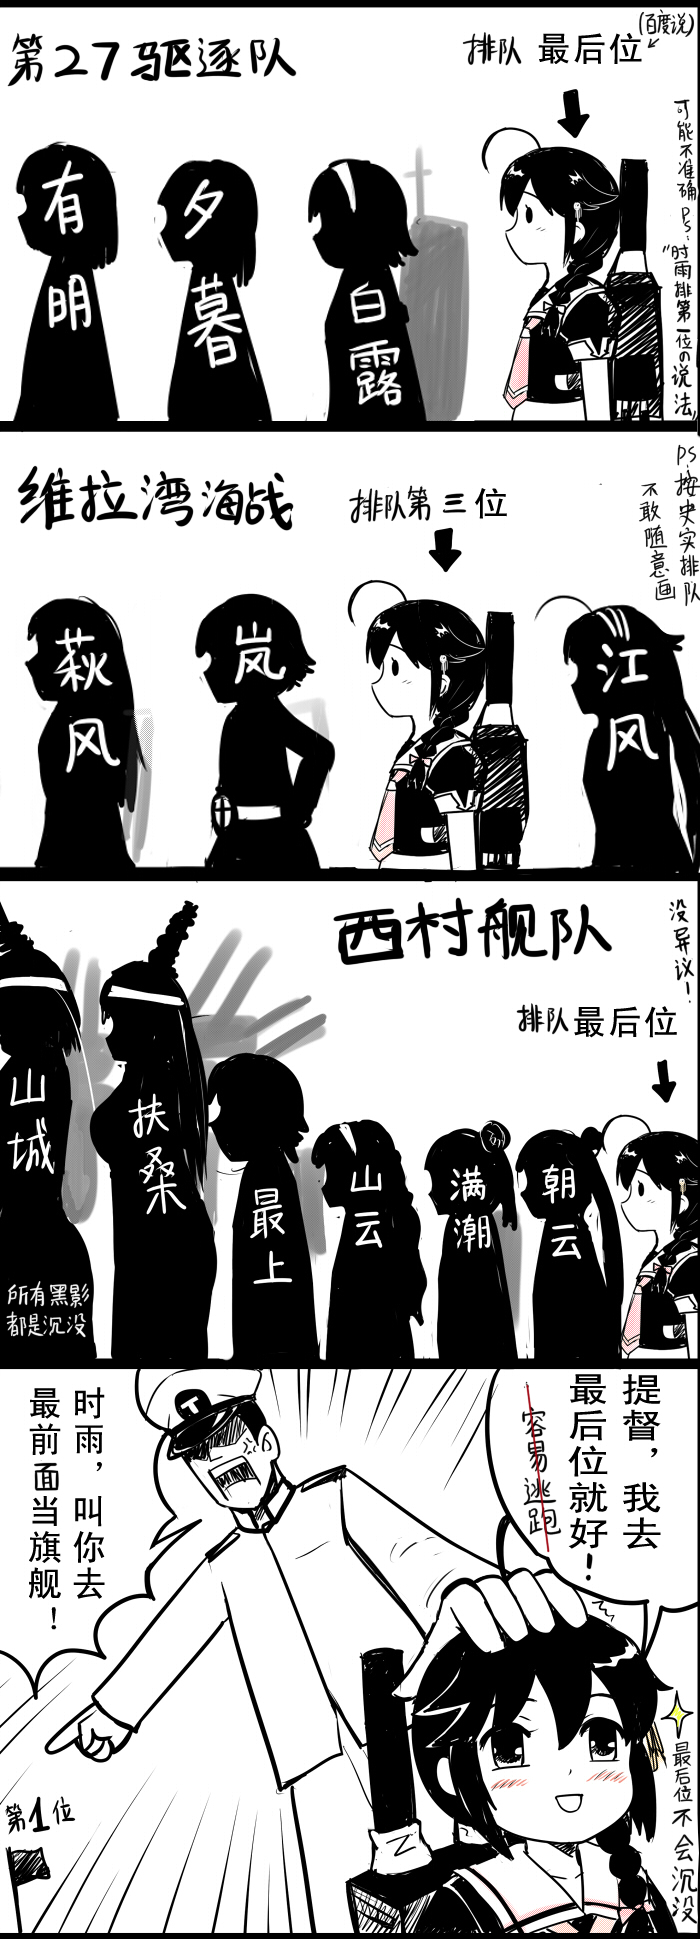 6+girls admiral_(kantai_collection) anger_vein arashi_(kantai_collection) asagumo_(kantai_collection) black_hair black_serafuku blush borrowed_character character_request chinese comic fusou_(kantai_collection) hagikaze_(kantai_collection) hat highres kantai_collection kawakaze_(kantai_collection) michishio_(kantai_collection) military military_uniform mogami_(kantai_collection) multiple_girls naval_uniform peaked_cap remodel_(kantai_collection) school_uniform serafuku shigure_(kantai_collection) shiratsuyu_(kantai_collection) silhouette smile translation_request turret uniform y.ssanoha yamagumo_(kantai_collection) yamashiro_(kantai_collection)